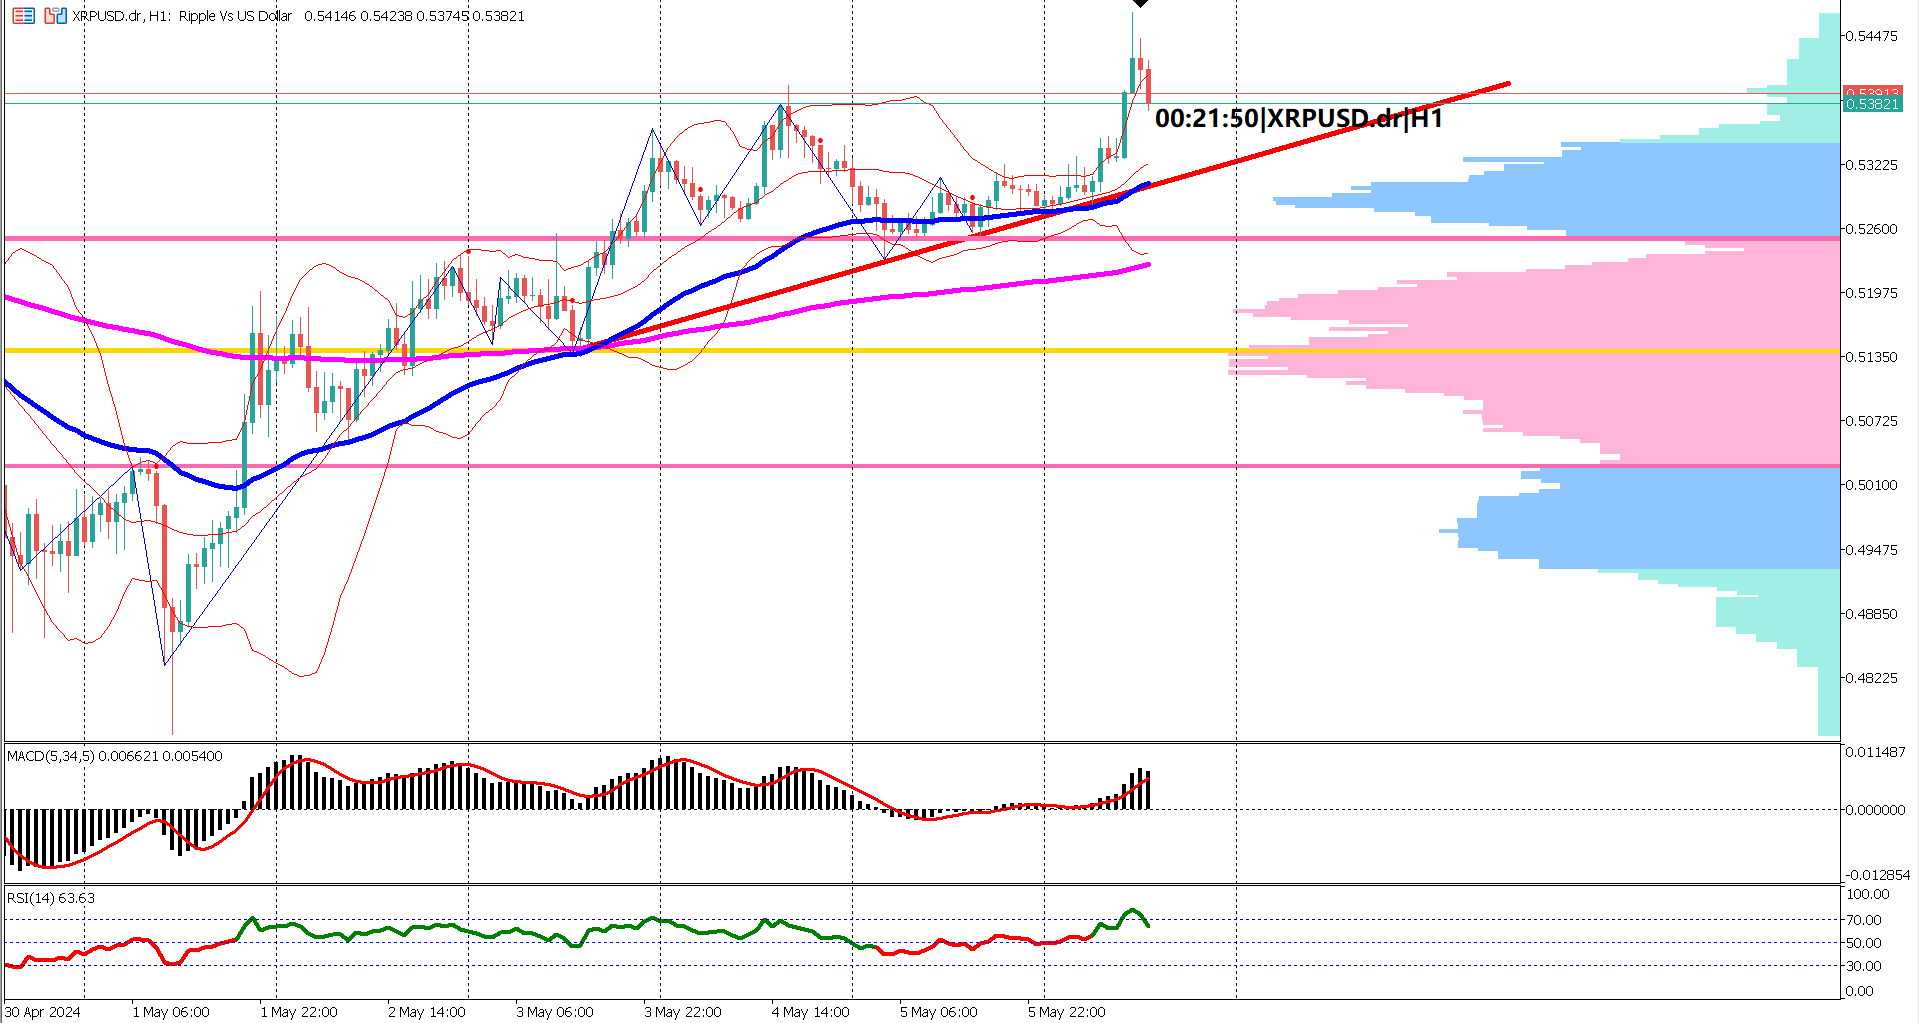 XRPUSD Sees Strong Rally Amidst Technical Signals